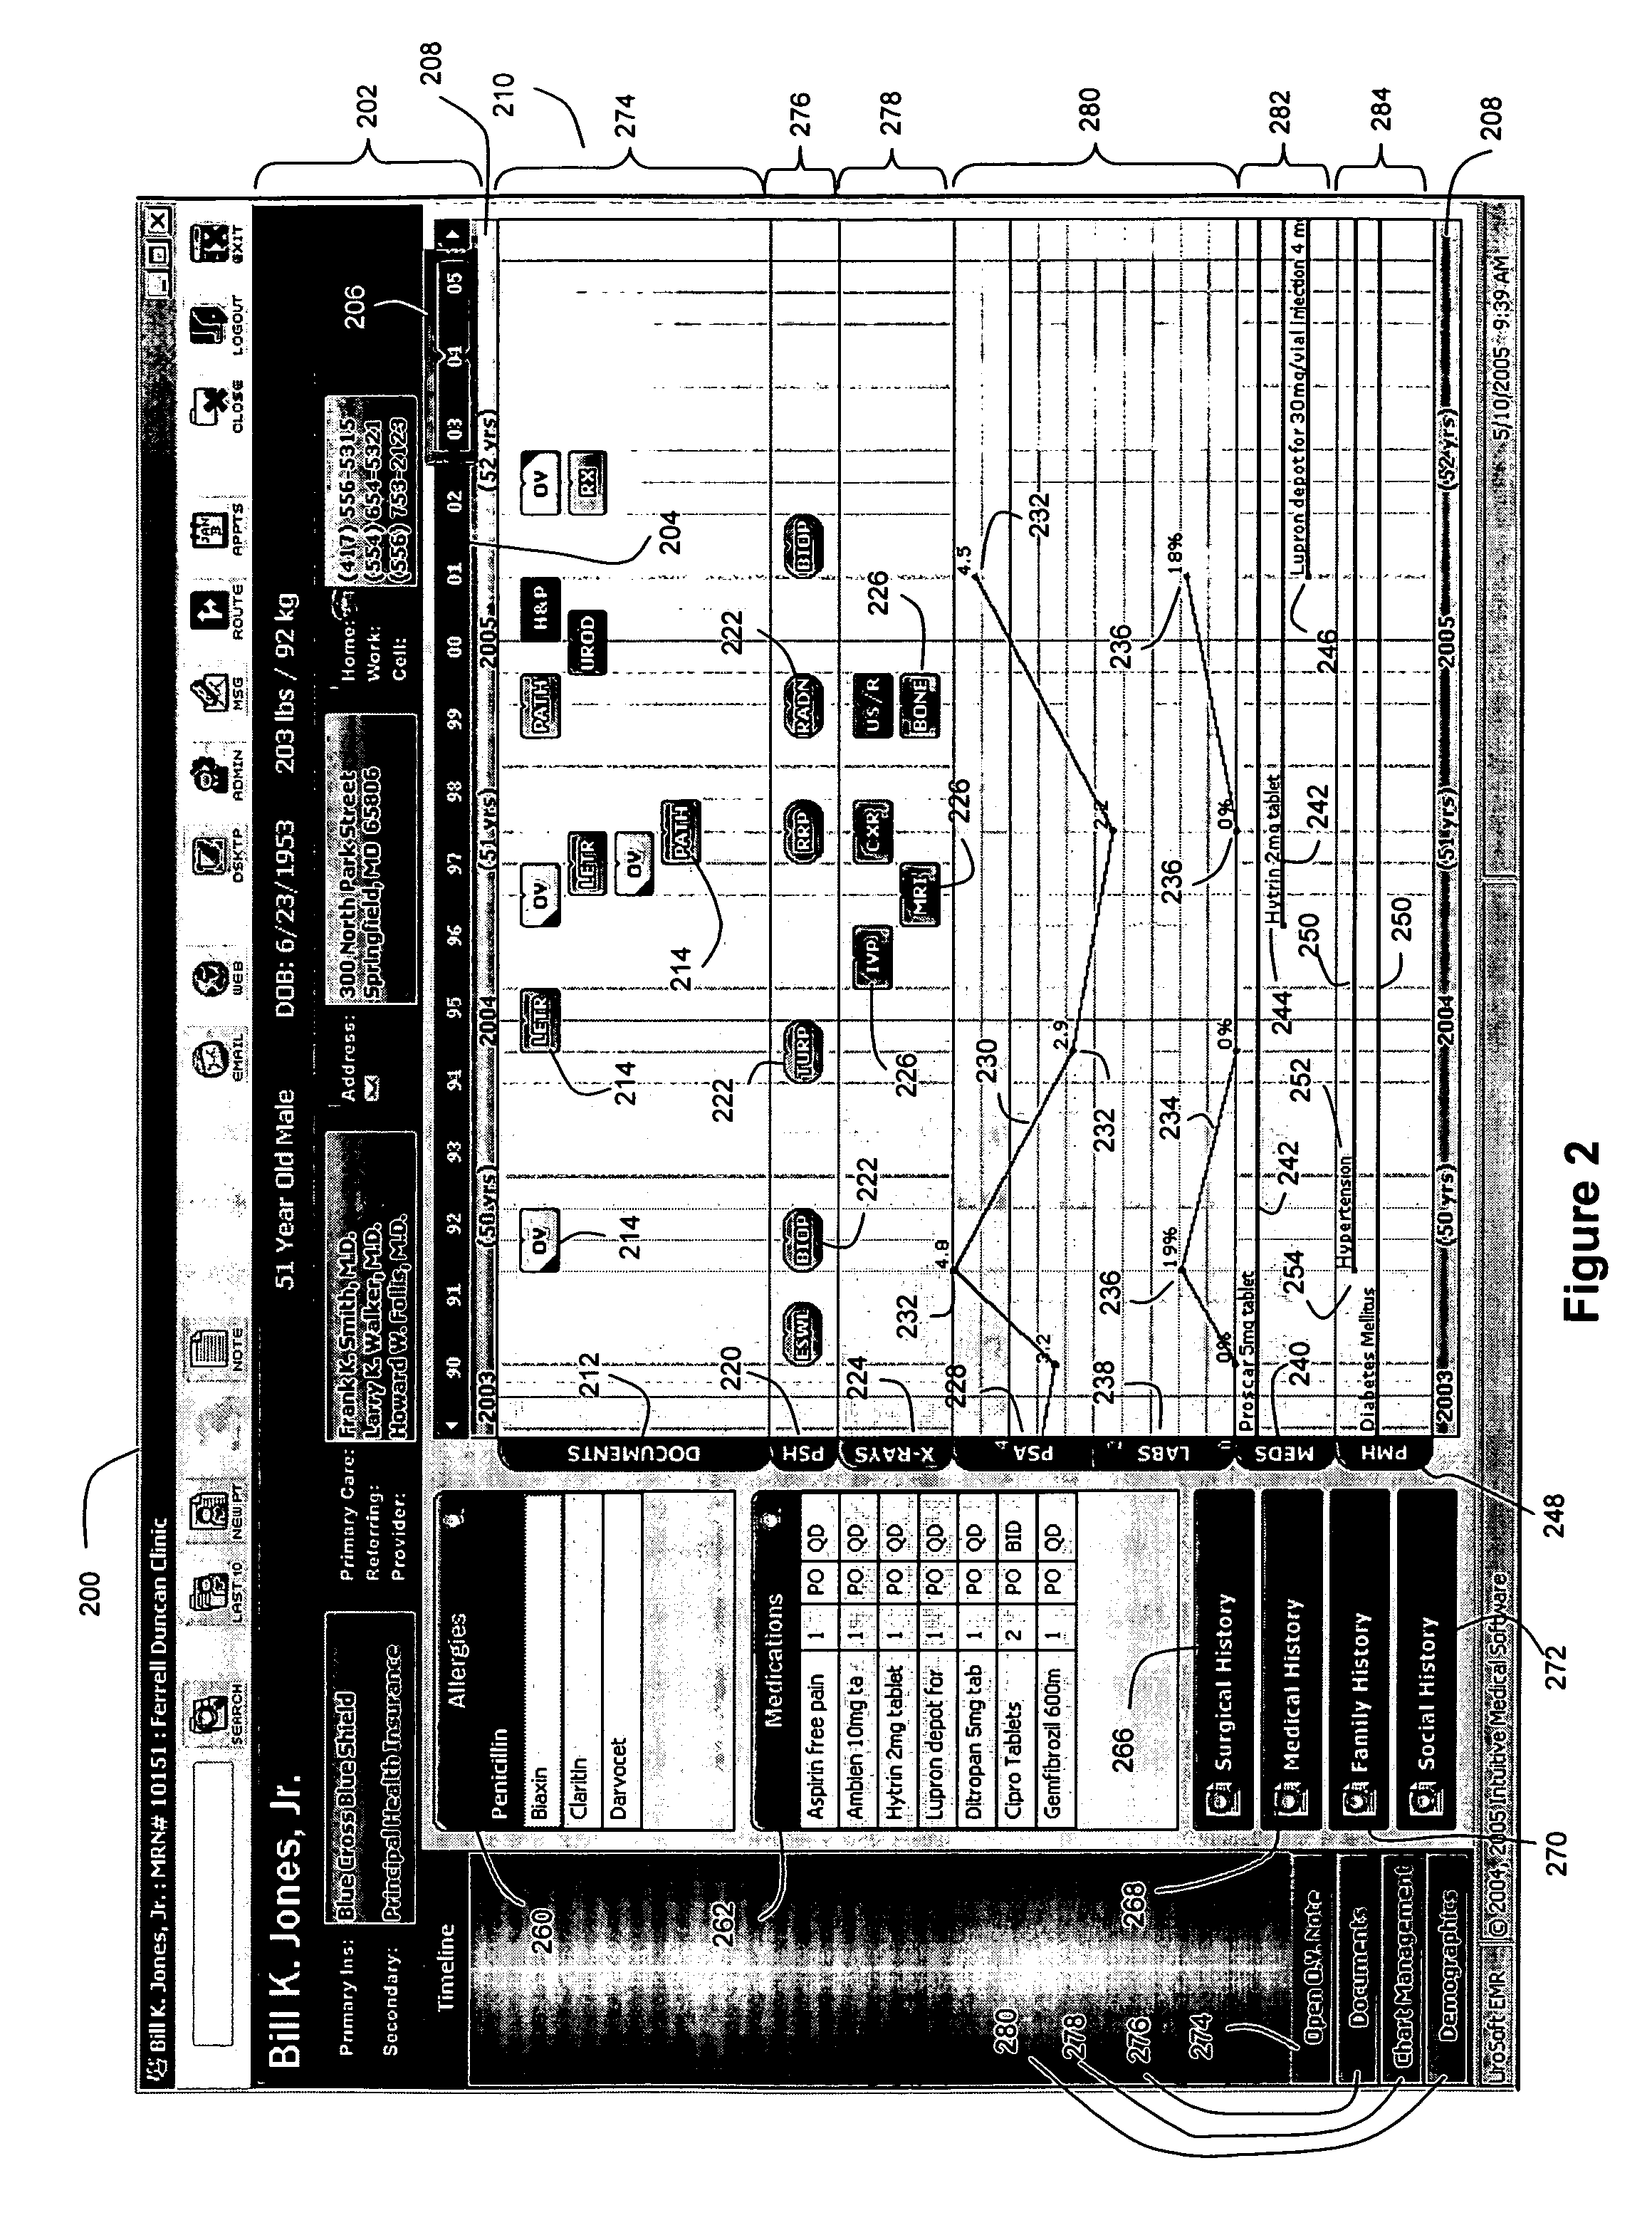 Method, system, and computer-readable medium for providing a patient electronic medical record with an improved timeline